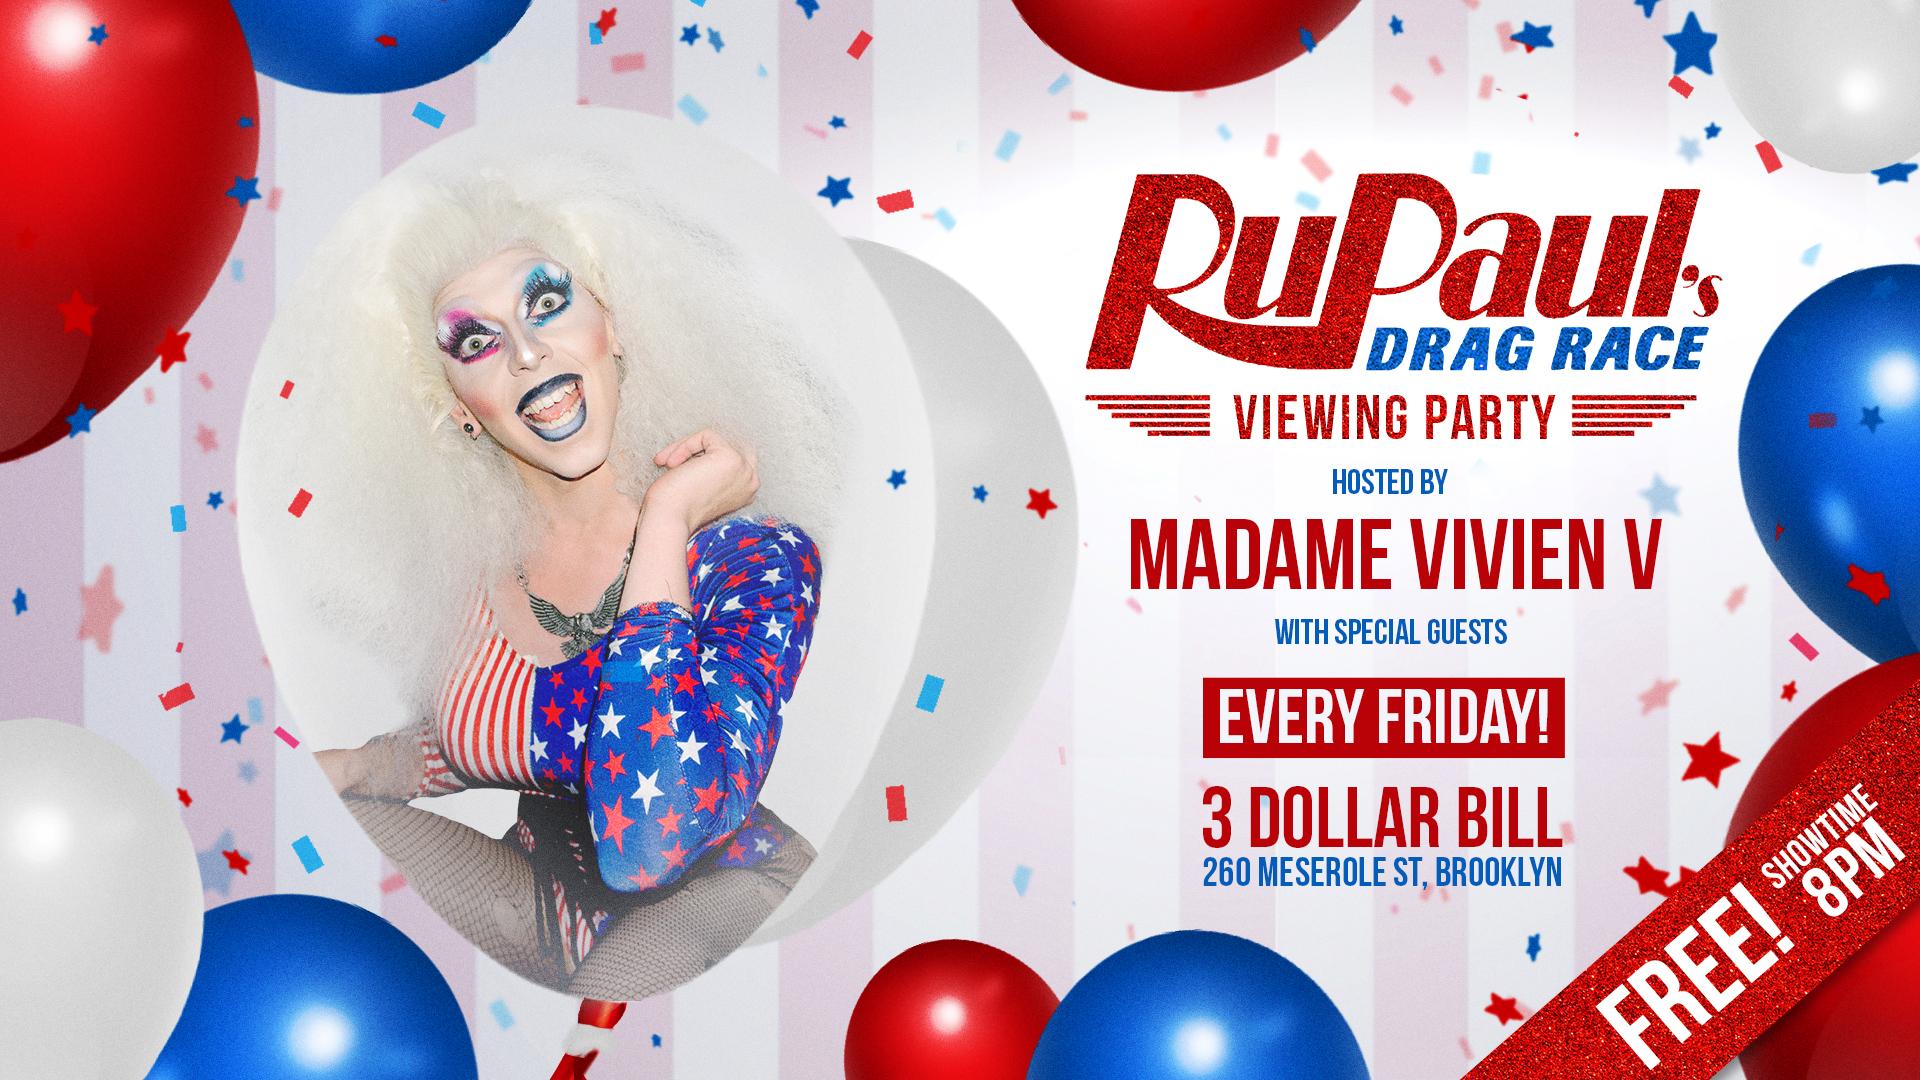 RuPaul's Drag Race Viewing Party - Hosted by Madame Vivien V